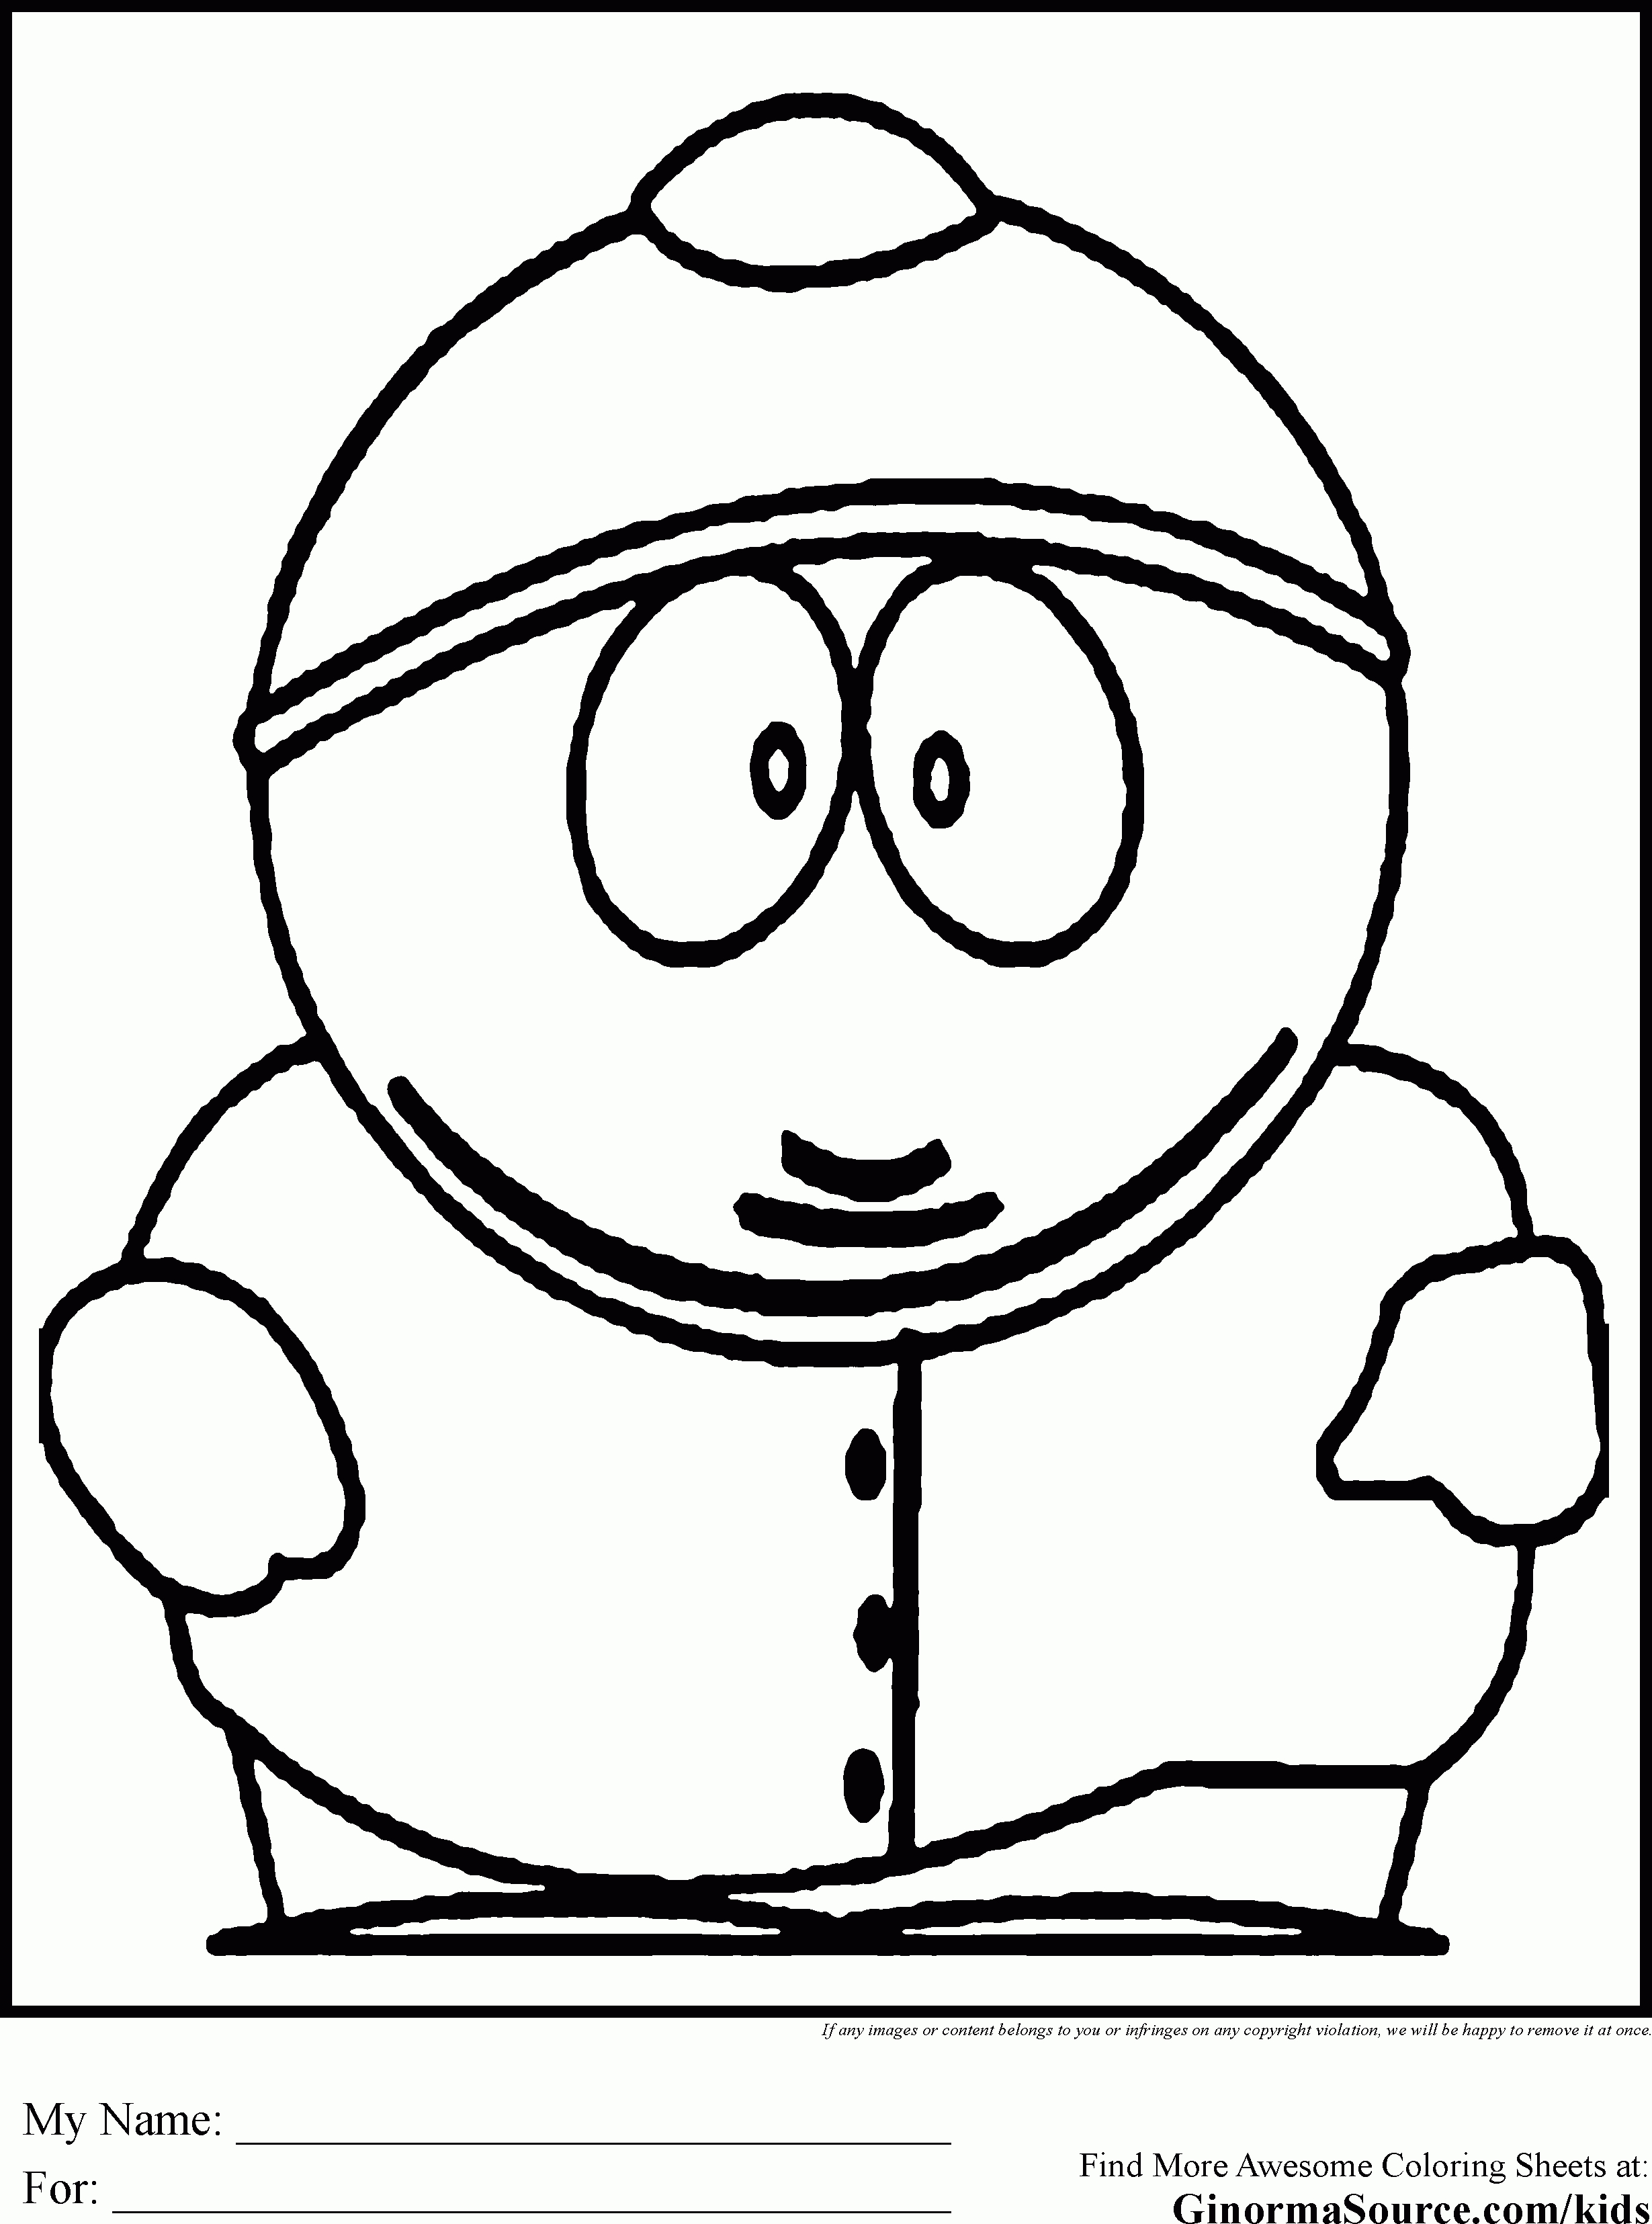 Southpark Coloring Pages For Teens | Coloring Pages | Pinterest - Free Printable South Park Coloring Pages